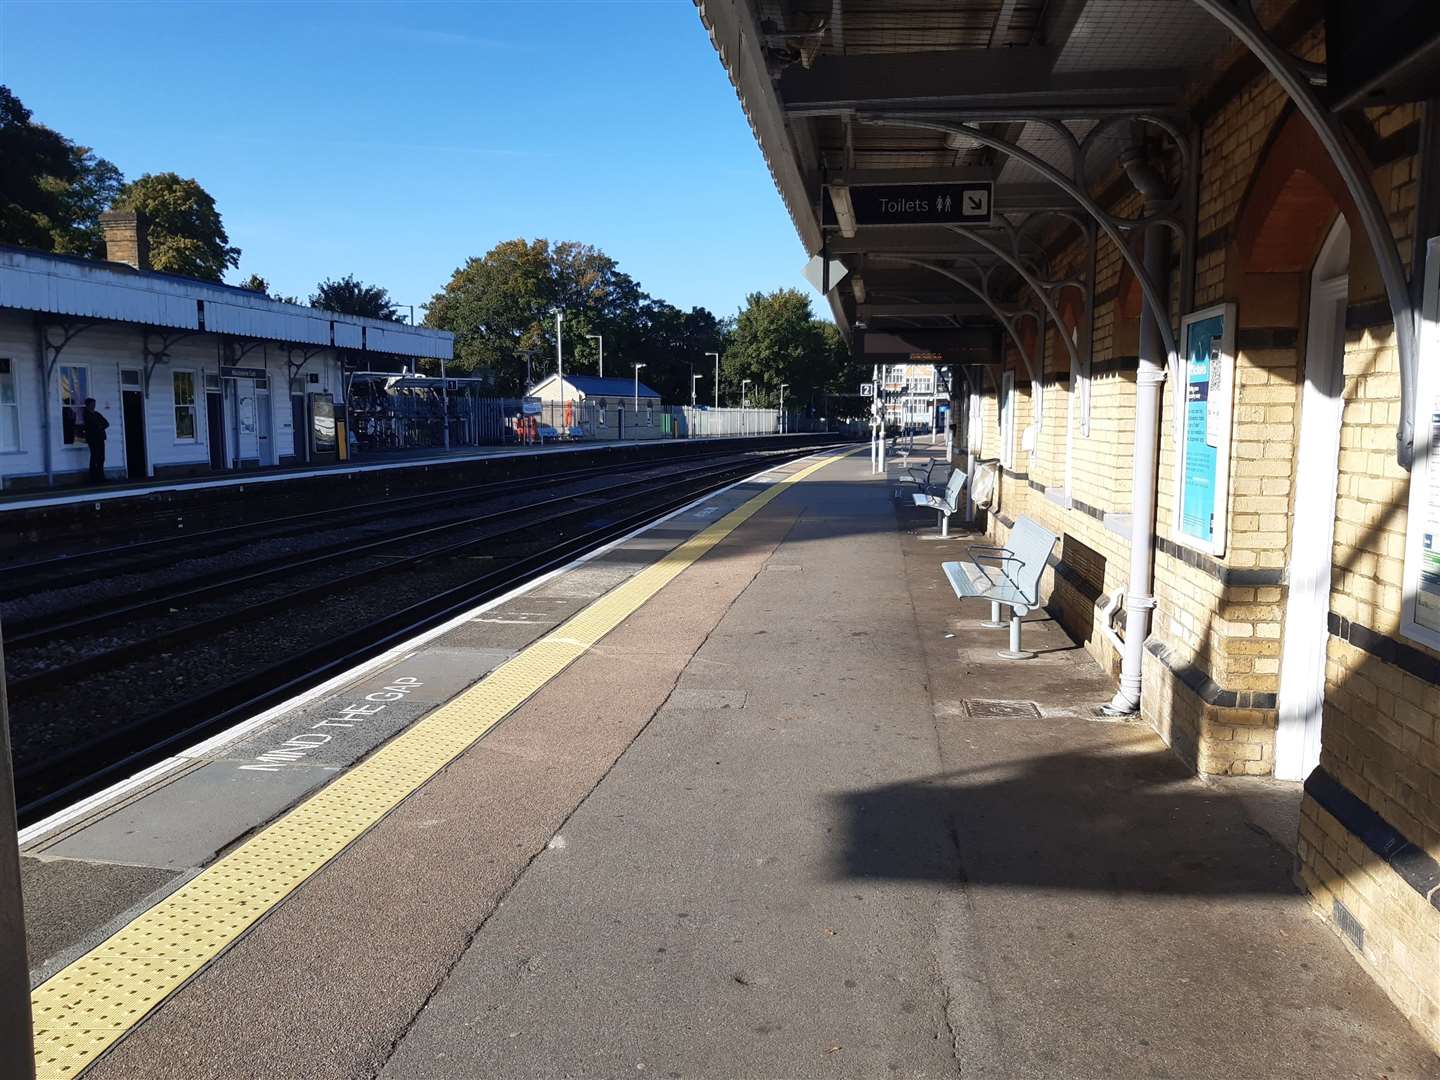 There will be empty platforms across the rail network today